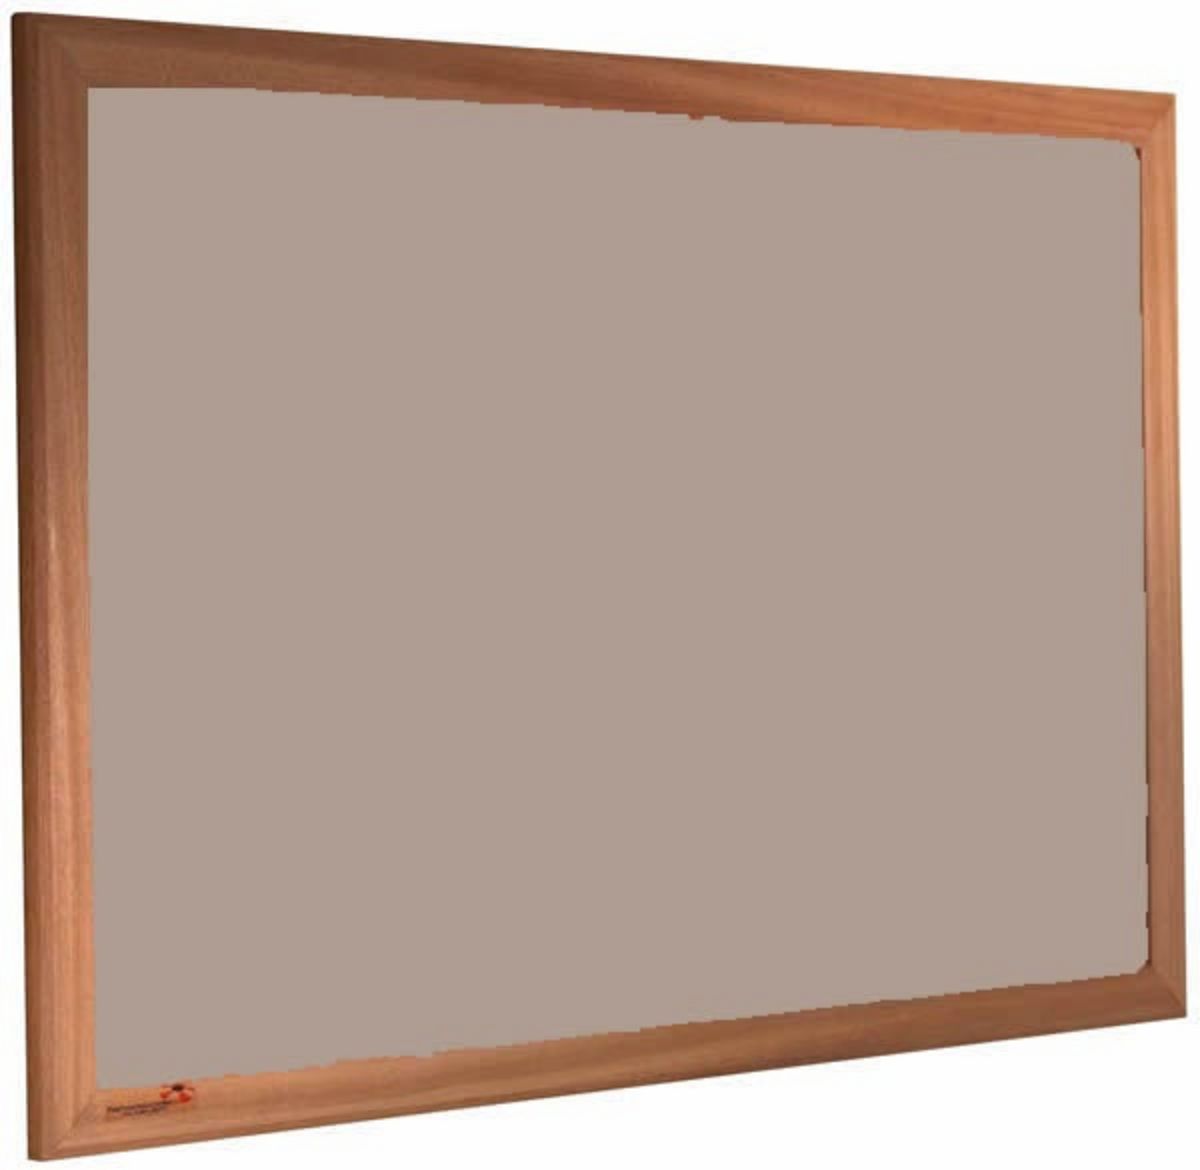 brown-rice-wooden-framed-forbo-nairn-notice-board.jpg